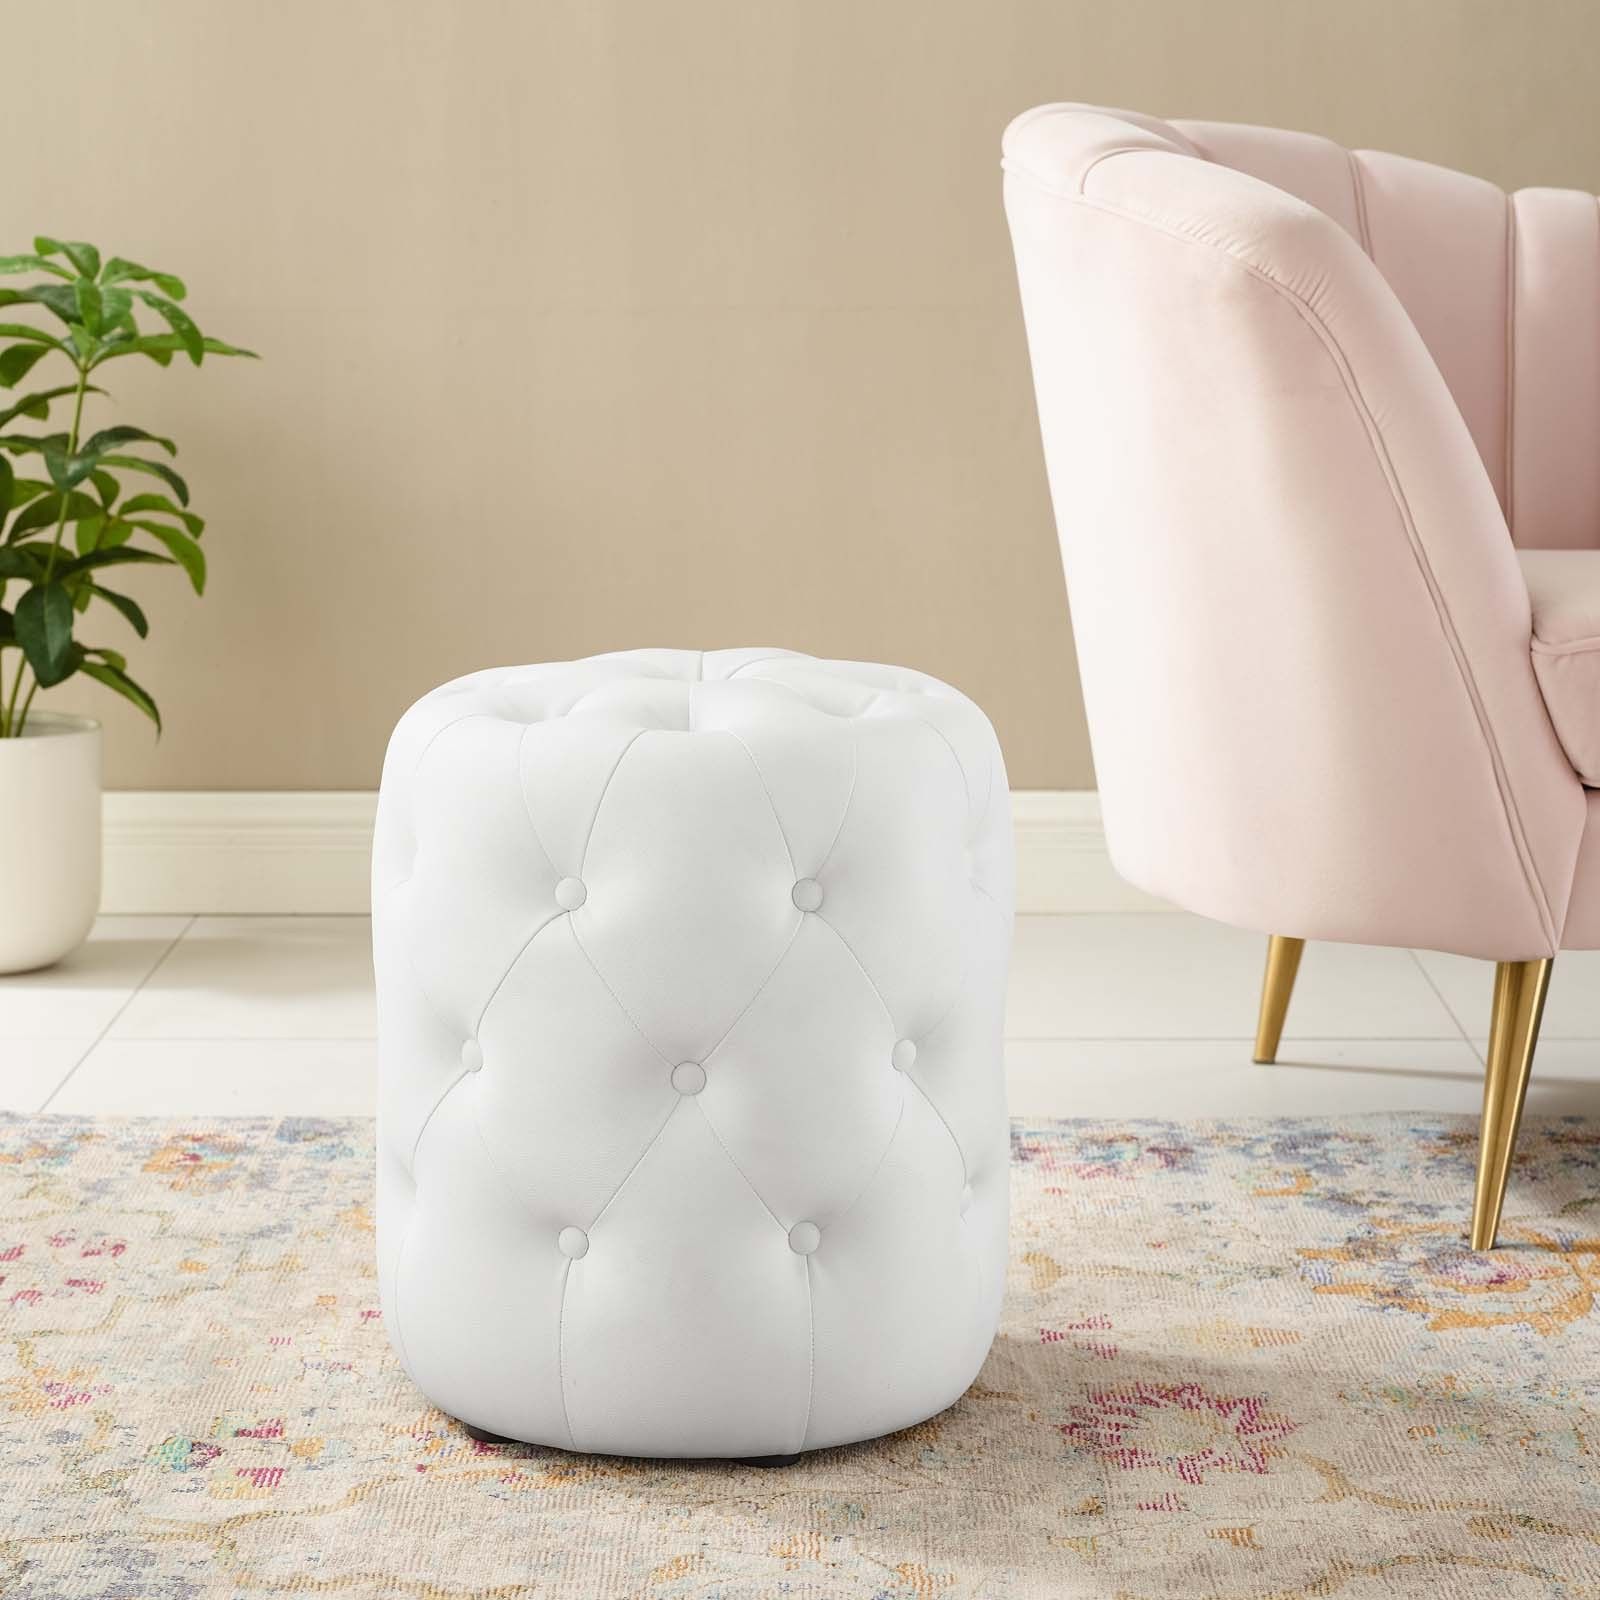 Anthem White Tufted Button Round Faux Leather Ottoman Eei 3777 Whi With Regard To Famous Round Blue Faux Leather Ottomans With Pull Tab (View 10 of 10)